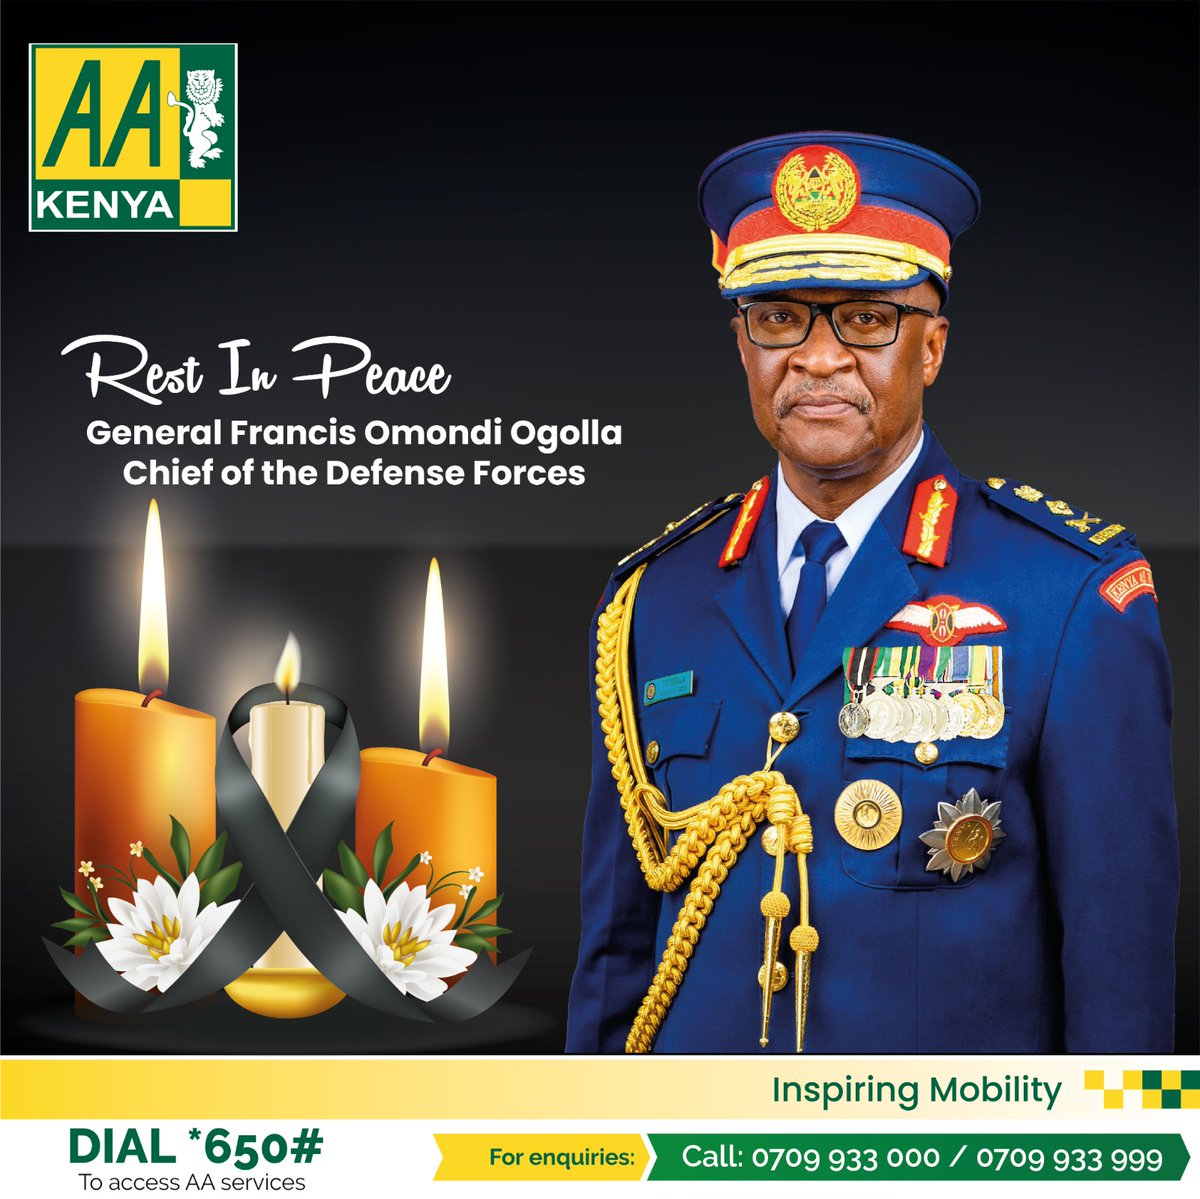 AA Kenya extends its deepest condolences for the loss of General Francis Omondi Ogolla, and his team which included 9 KDF personnel. Our thoughts are with their families, friends, and the entire military community during this difficult time. Rest in peace. #AAKenyacares